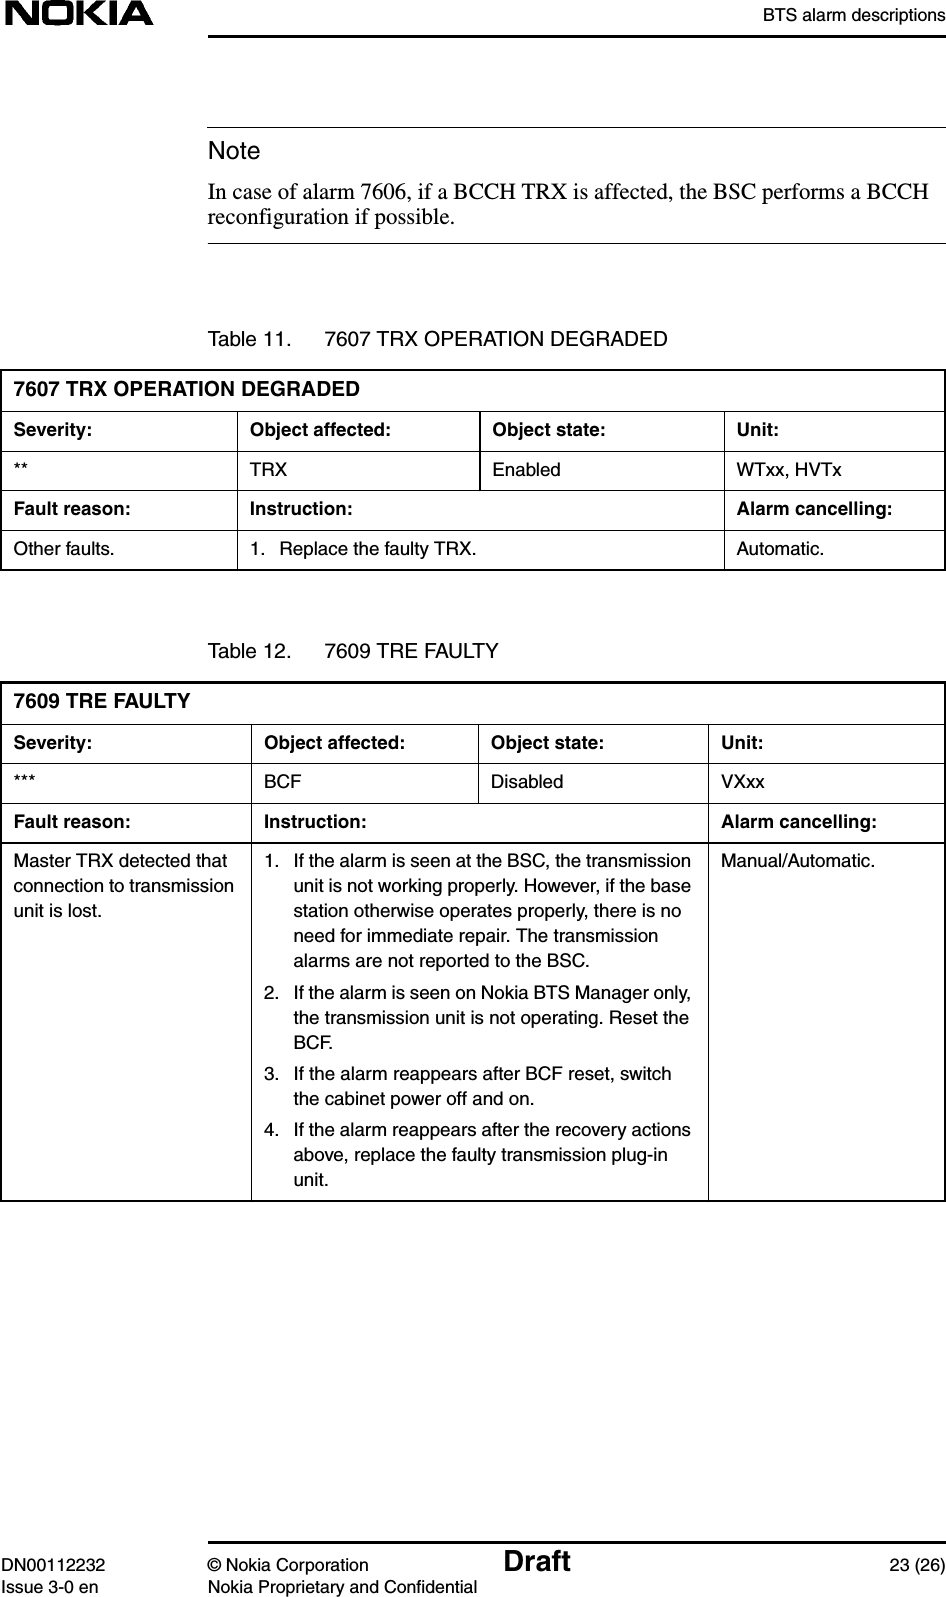 BTS alarm descriptionsDN00112232 © Nokia Corporation Draft 23 (26)Issue 3-0 en Nokia Proprietary and ConfidentialNoteIn case of alarm 7606, if a BCCH TRX is affected, the BSC performs a BCCHreconfiguration if possible.Table 11. 7607 TRX OPERATION DEGRADED7607 TRX OPERATION DEGRADEDSeverity: Object affected: Object state: Unit:** TRX Enabled WTxx, HVTxFault reason: Instruction: Alarm cancelling:Other faults. 1. Replace the faulty TRX. Automatic.Table 12. 7609 TRE FAULTY7609 TRE FAULTYSeverity: Object affected: Object state: Unit:*** BCF Disabled VXxxFault reason: Instruction: Alarm cancelling:Master TRX detected thatconnection to transmissionunit is lost.1. If the alarm is seen at the BSC, the transmissionunit is not working properly. However, if the basestation otherwise operates properly, there is noneed for immediate repair. The transmissionalarms are not reported to the BSC.2. If the alarm is seen on Nokia BTS Manager only,the transmission unit is not operating. Reset theBCF.3. If the alarm reappears after BCF reset, switchthe cabinet power off and on.4. If the alarm reappears after the recovery actionsabove, replace the faulty transmission plug-inunit.Manual/Automatic.